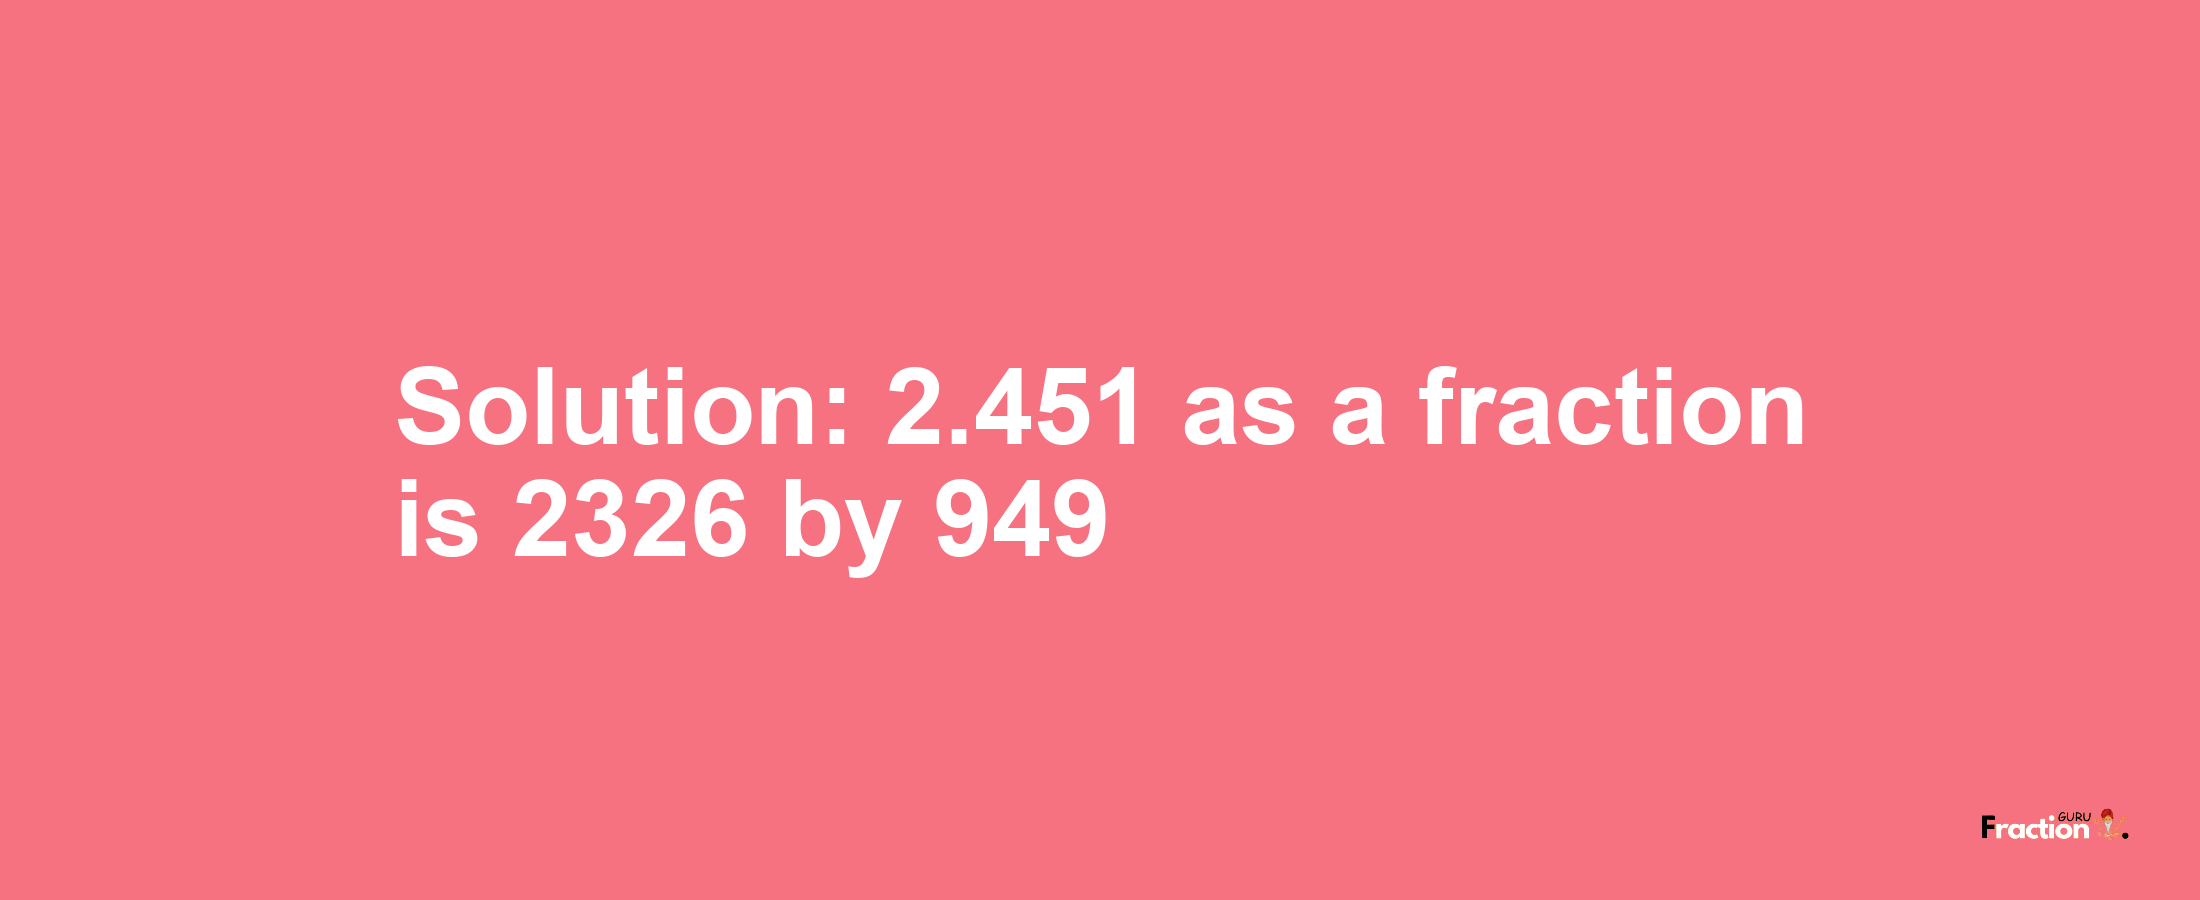 Solution:2.451 as a fraction is 2326/949